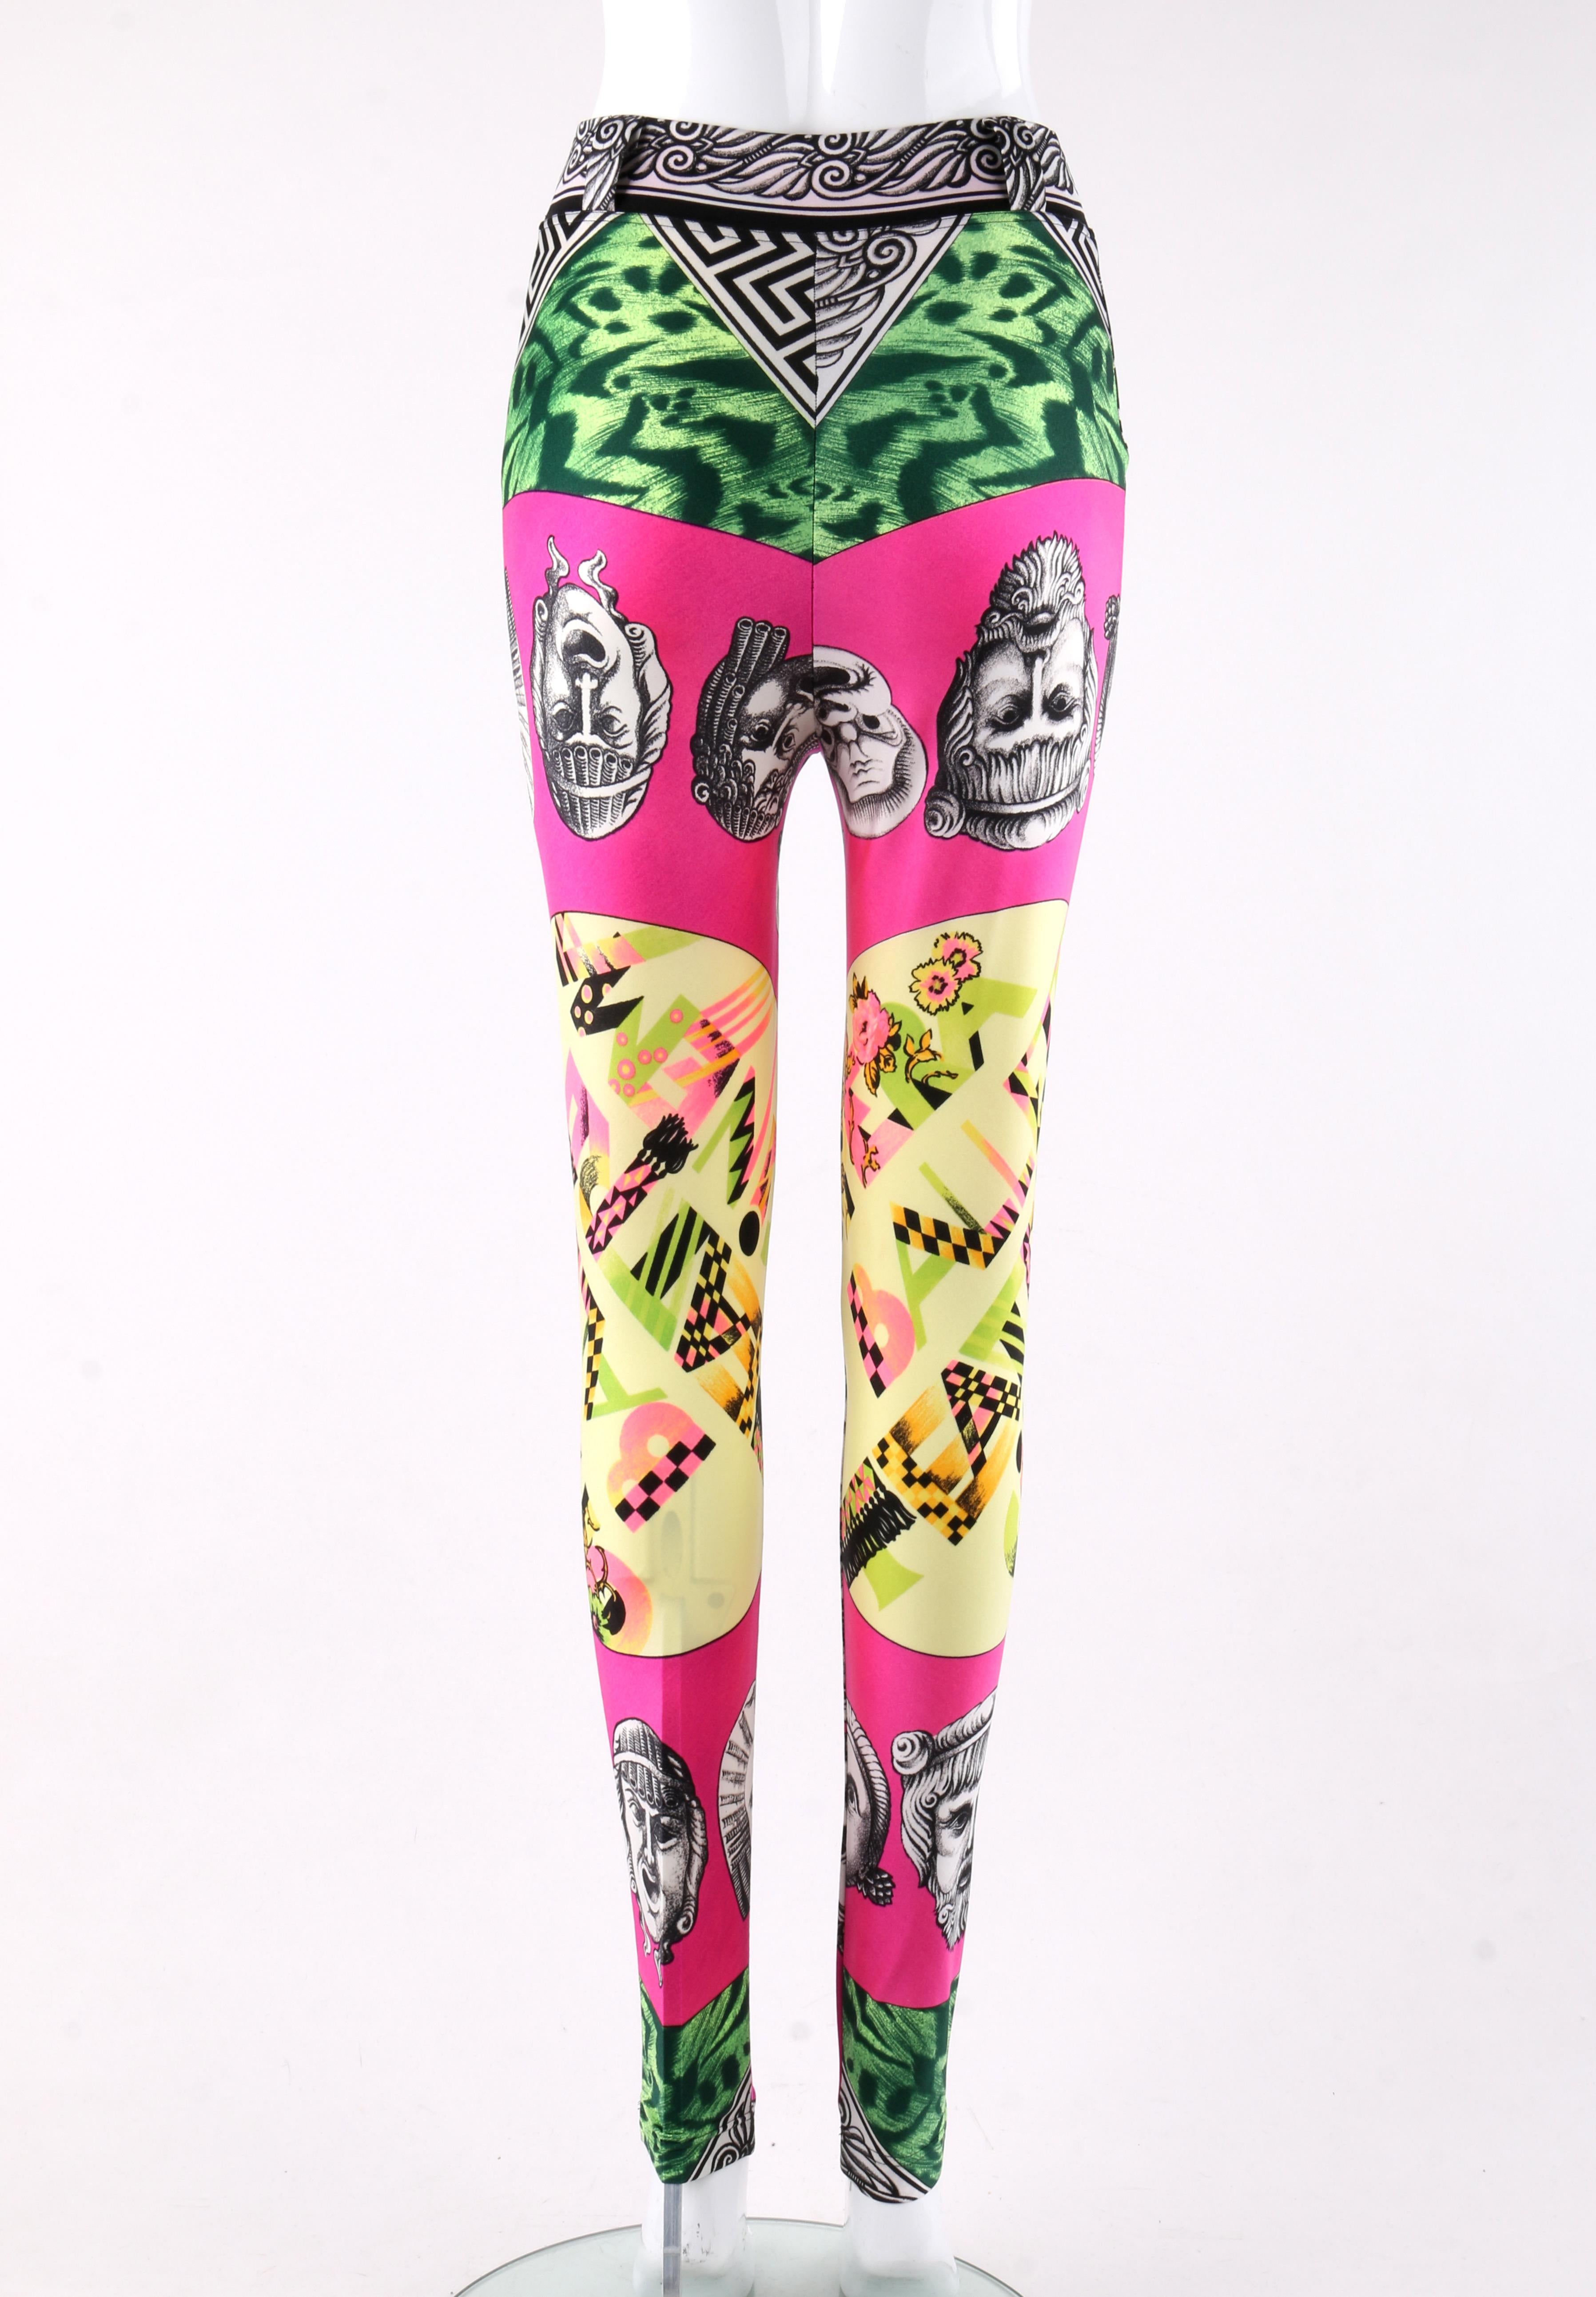 GIANNI VERSACE S/S 1991 “Warhol” Balletto Teatro Printed Leggings For ...